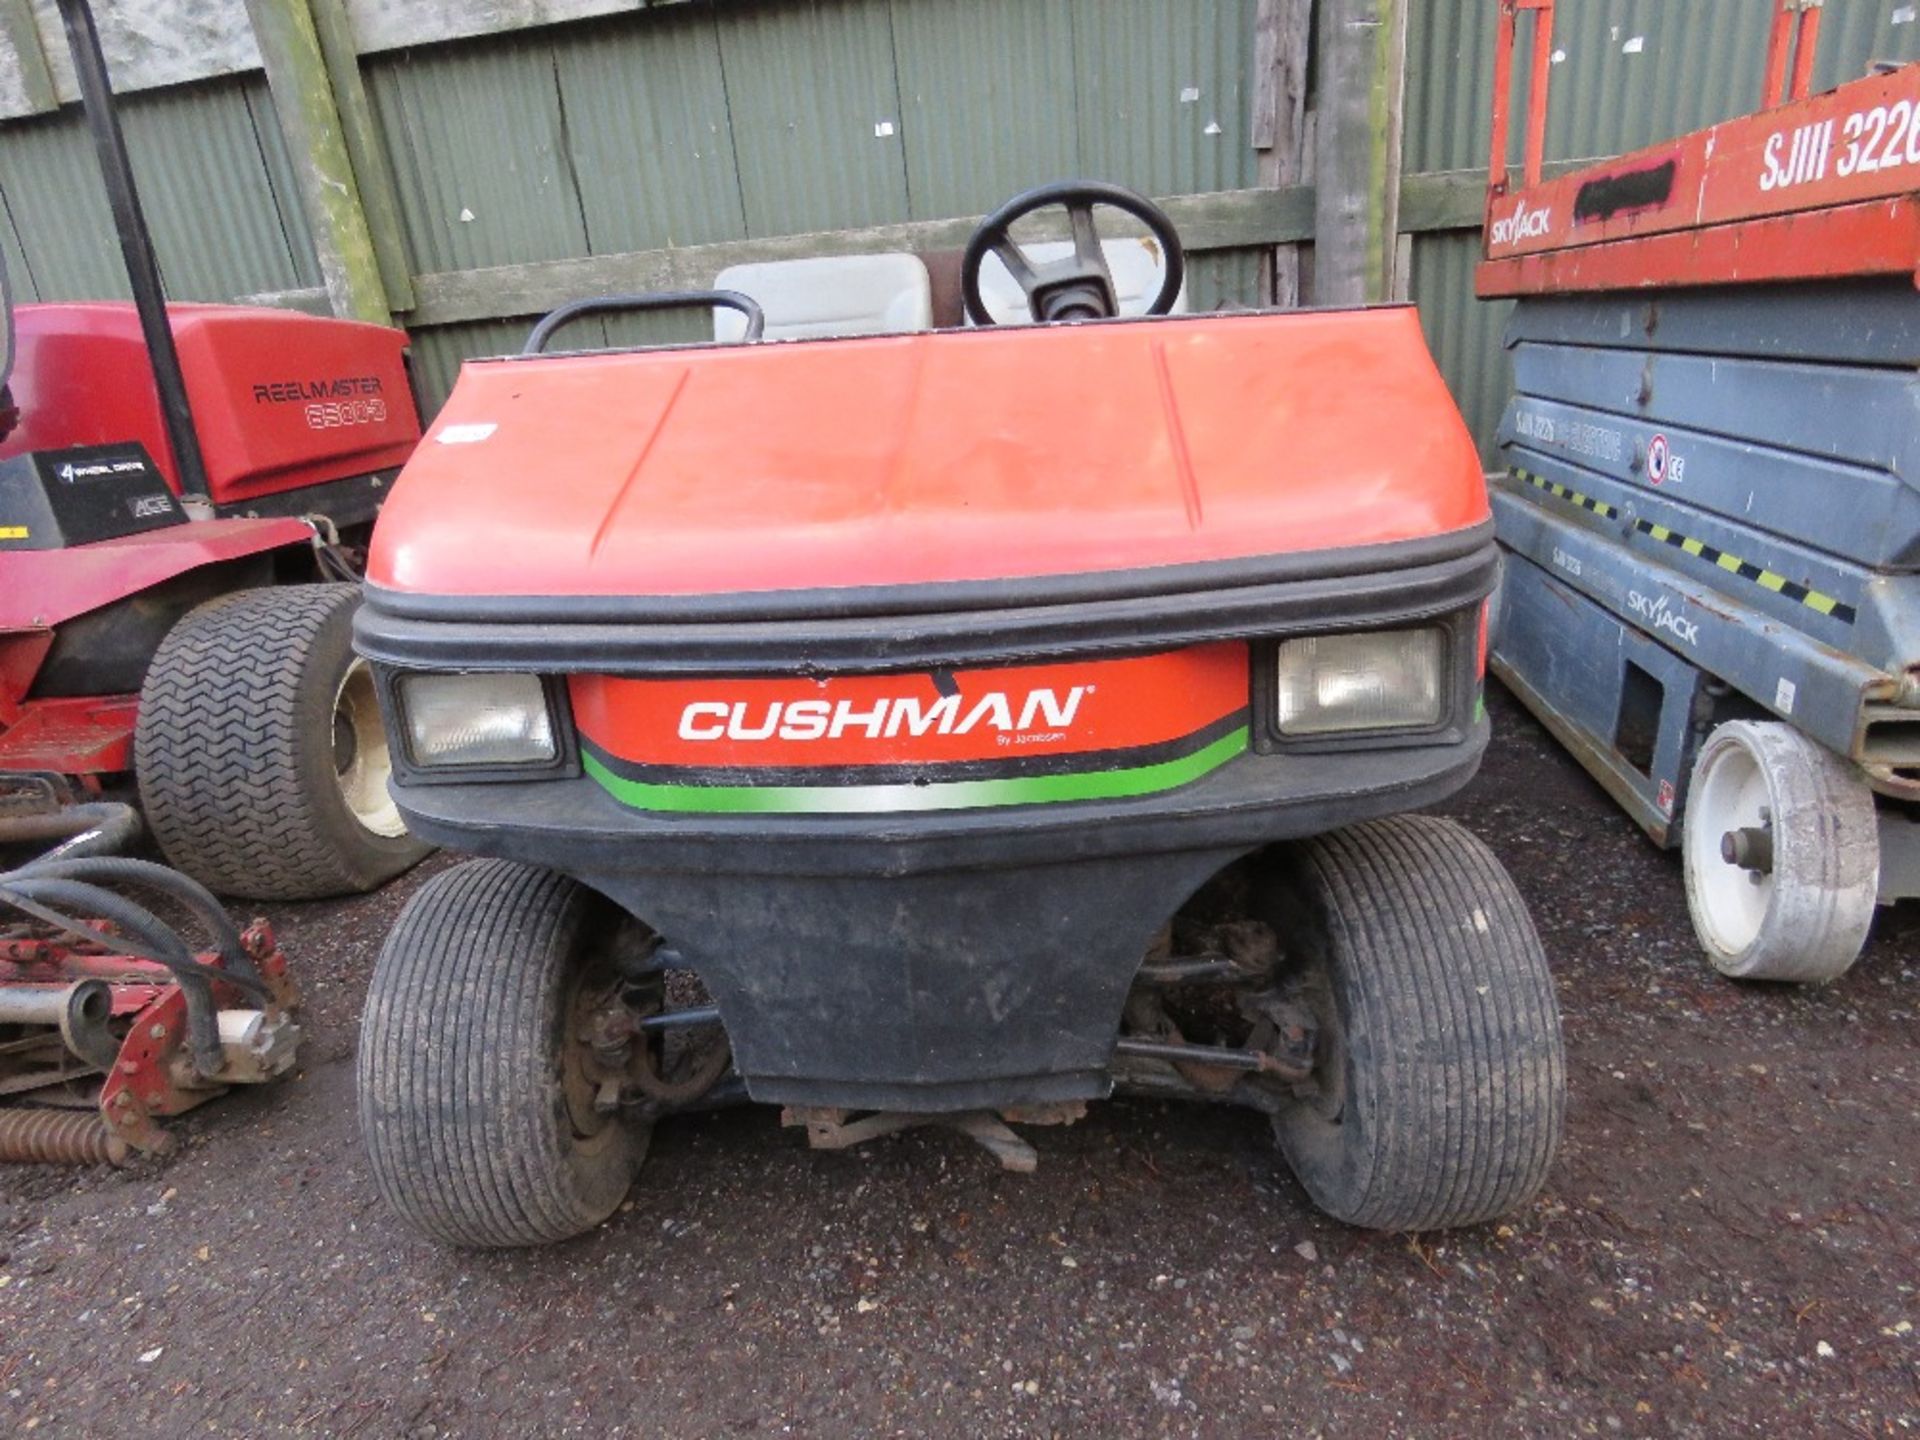 CUSHMAN TURF TRUCKSTER 2WD DIESEL ENGINED GROUNDS MAINTENANCE VEHICLE, 2283 REC HOURS. WHEN TESTED W - Image 3 of 8